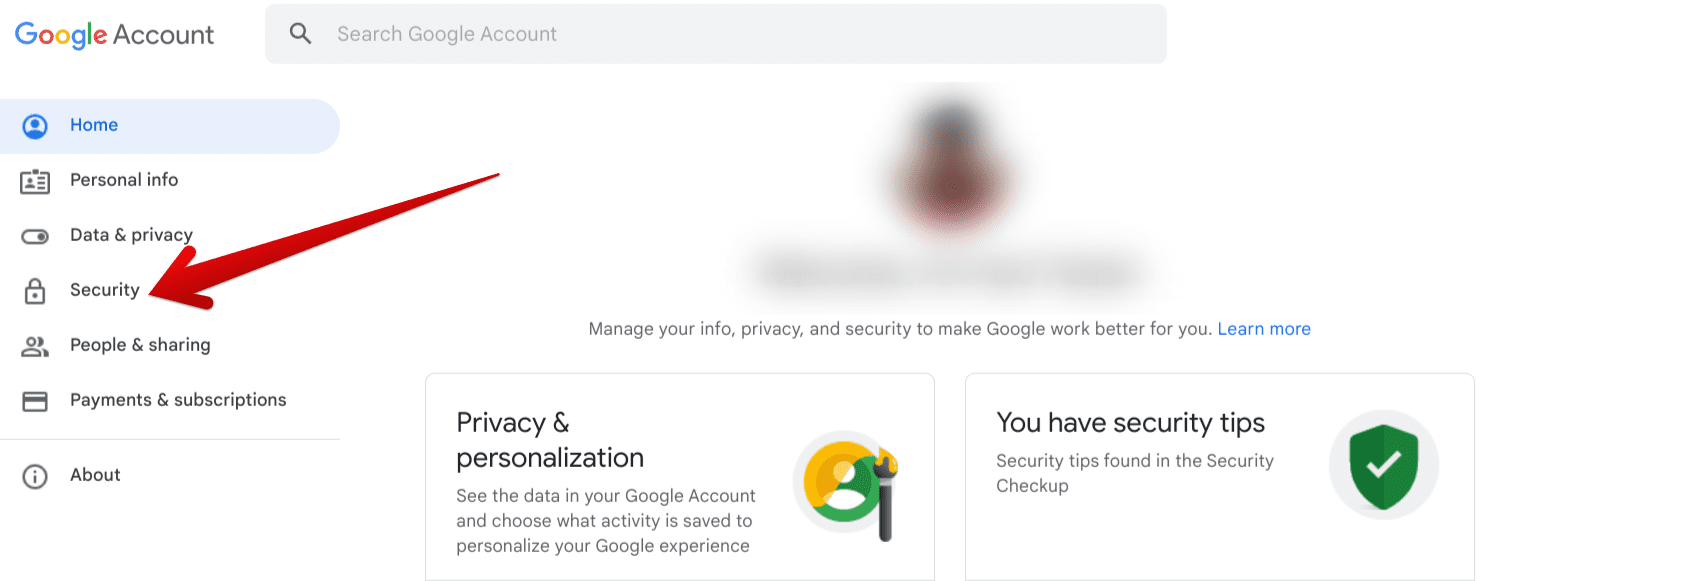 Accessing the "Security" section of the Google account